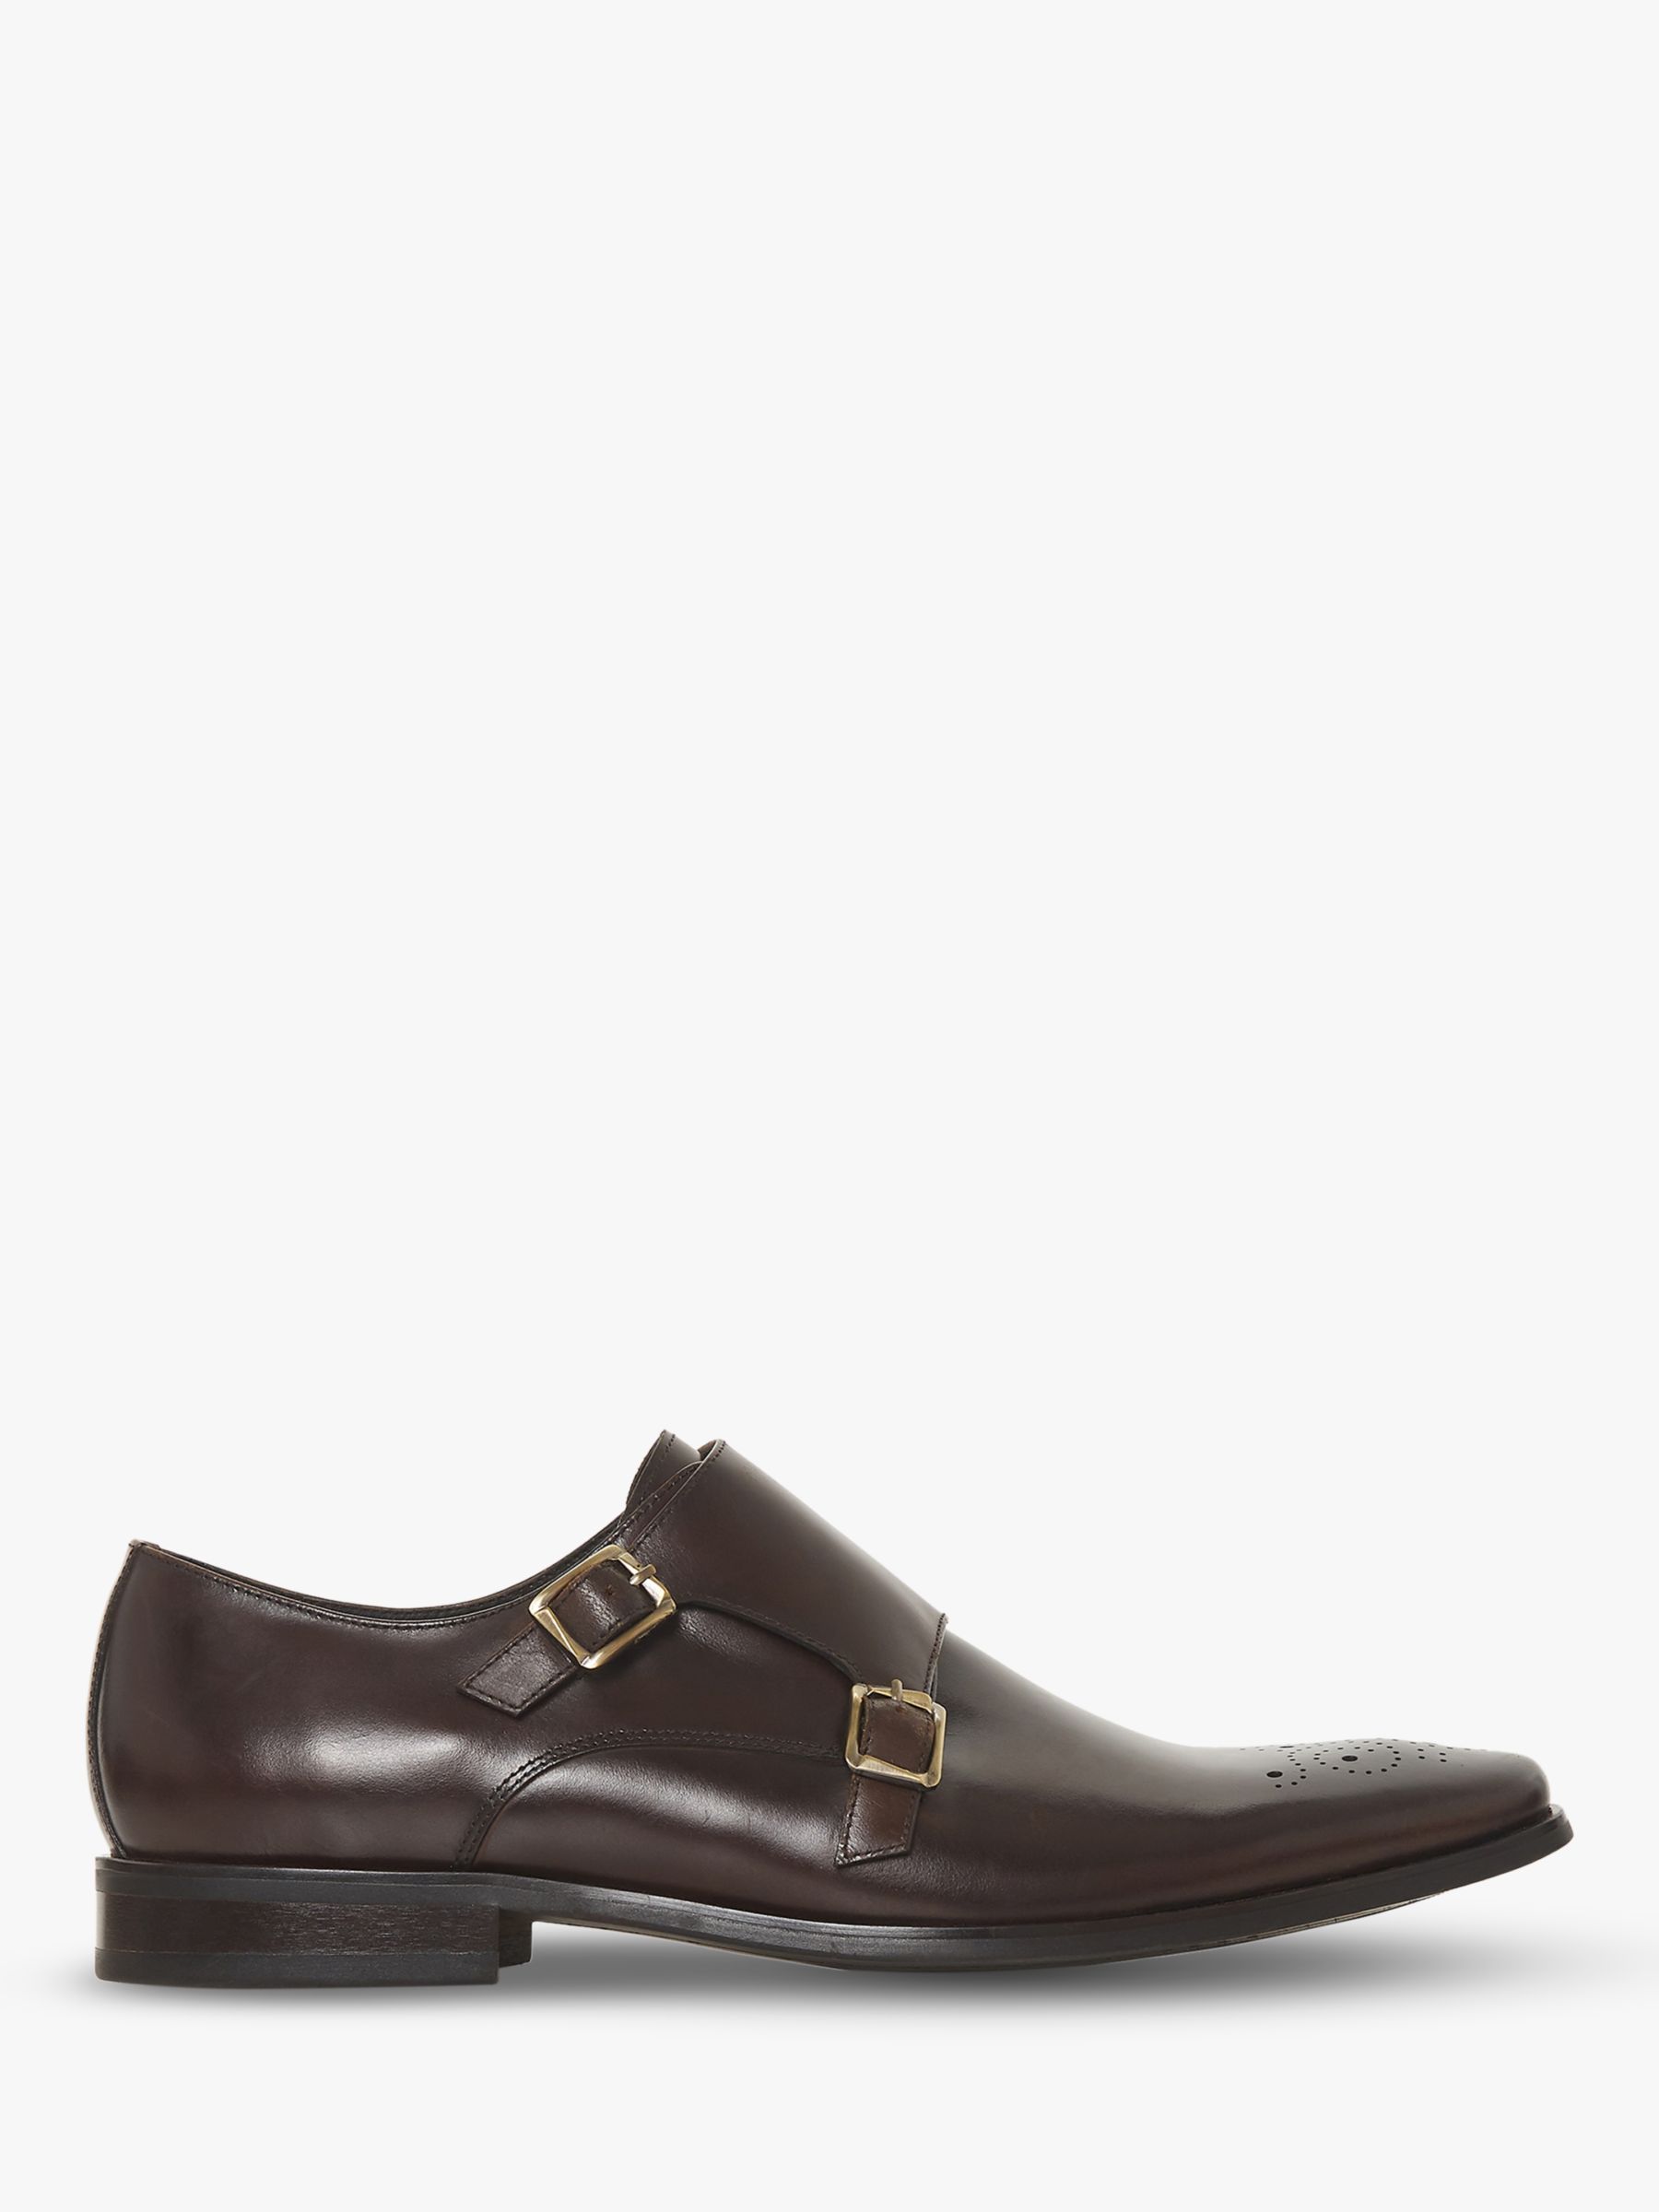 Dune Pinch Monk Strap Leather Shoes